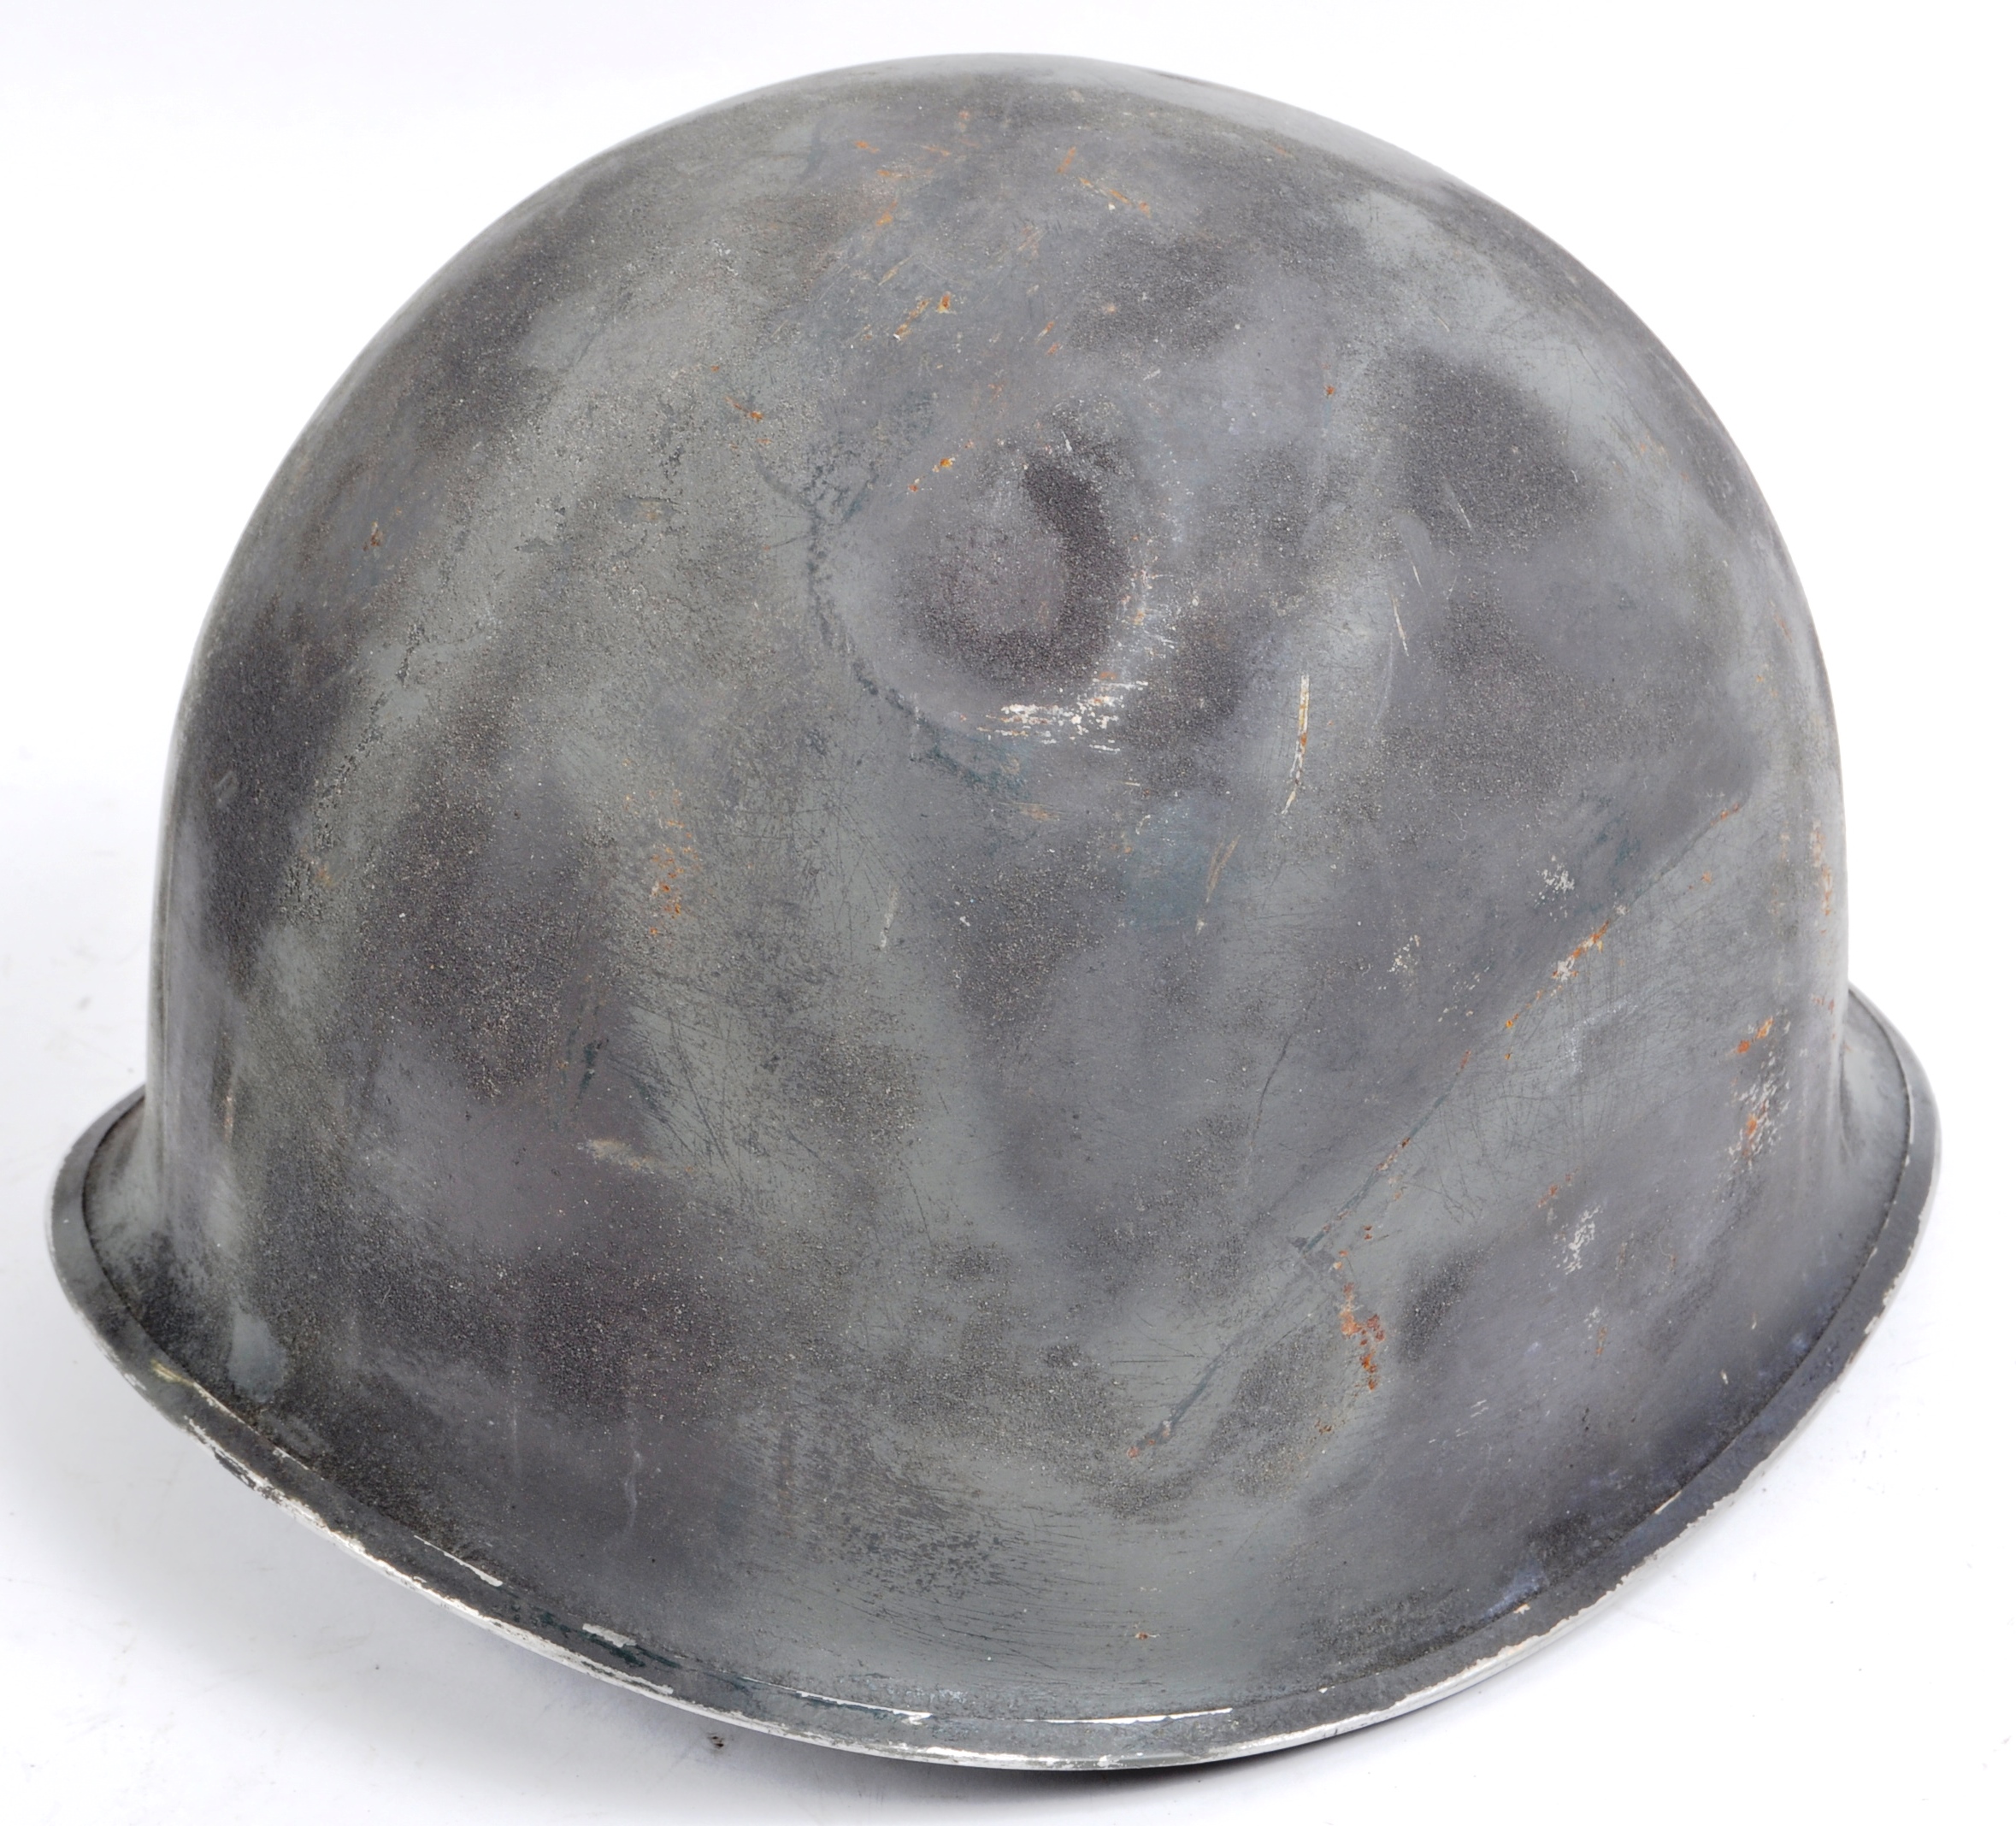 WWII SECOND WORLD WAR US ARMY M1 FRONT SEAM HELMET - Image 2 of 5